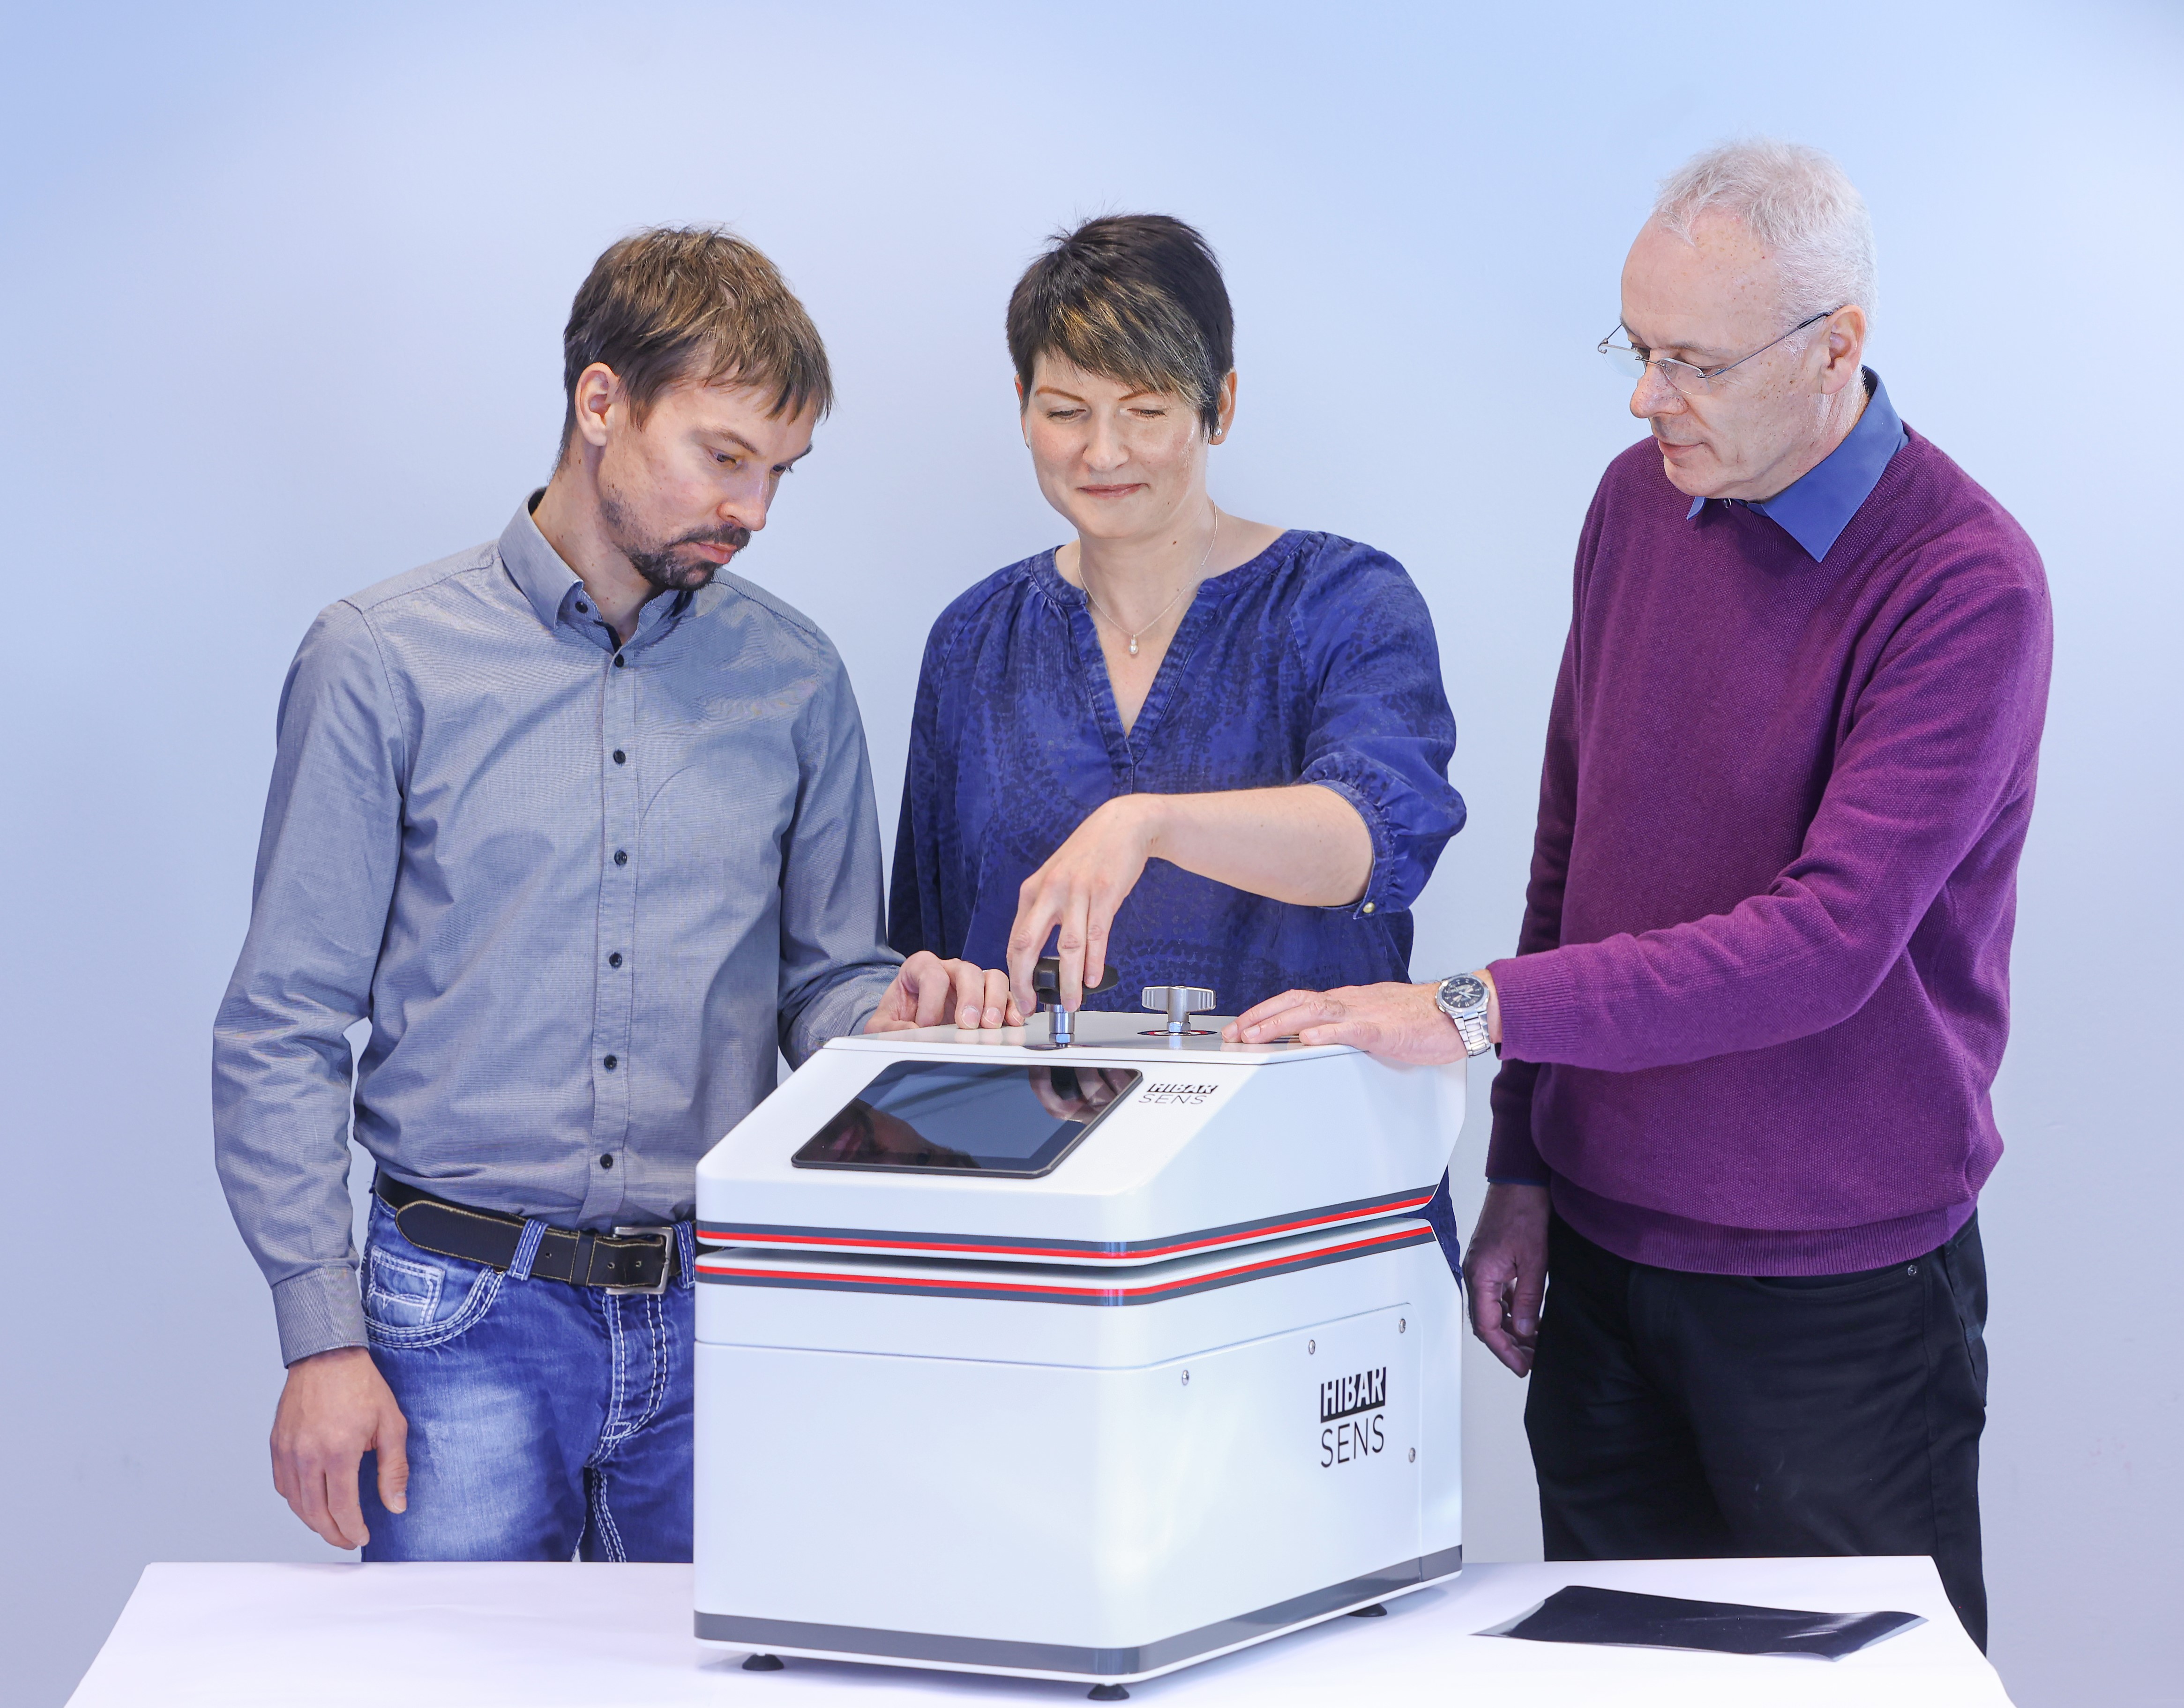 The Dresden-based company Sempa Systems GmbH will offer the market-ready HiBarSens® measuring device based on the new technology. In the picture: Susann Kleber (center) and Dr. Wulf Grählert (right) from Fraunhofer IWS and Johannes Grübler (left) from Sempa Systems.